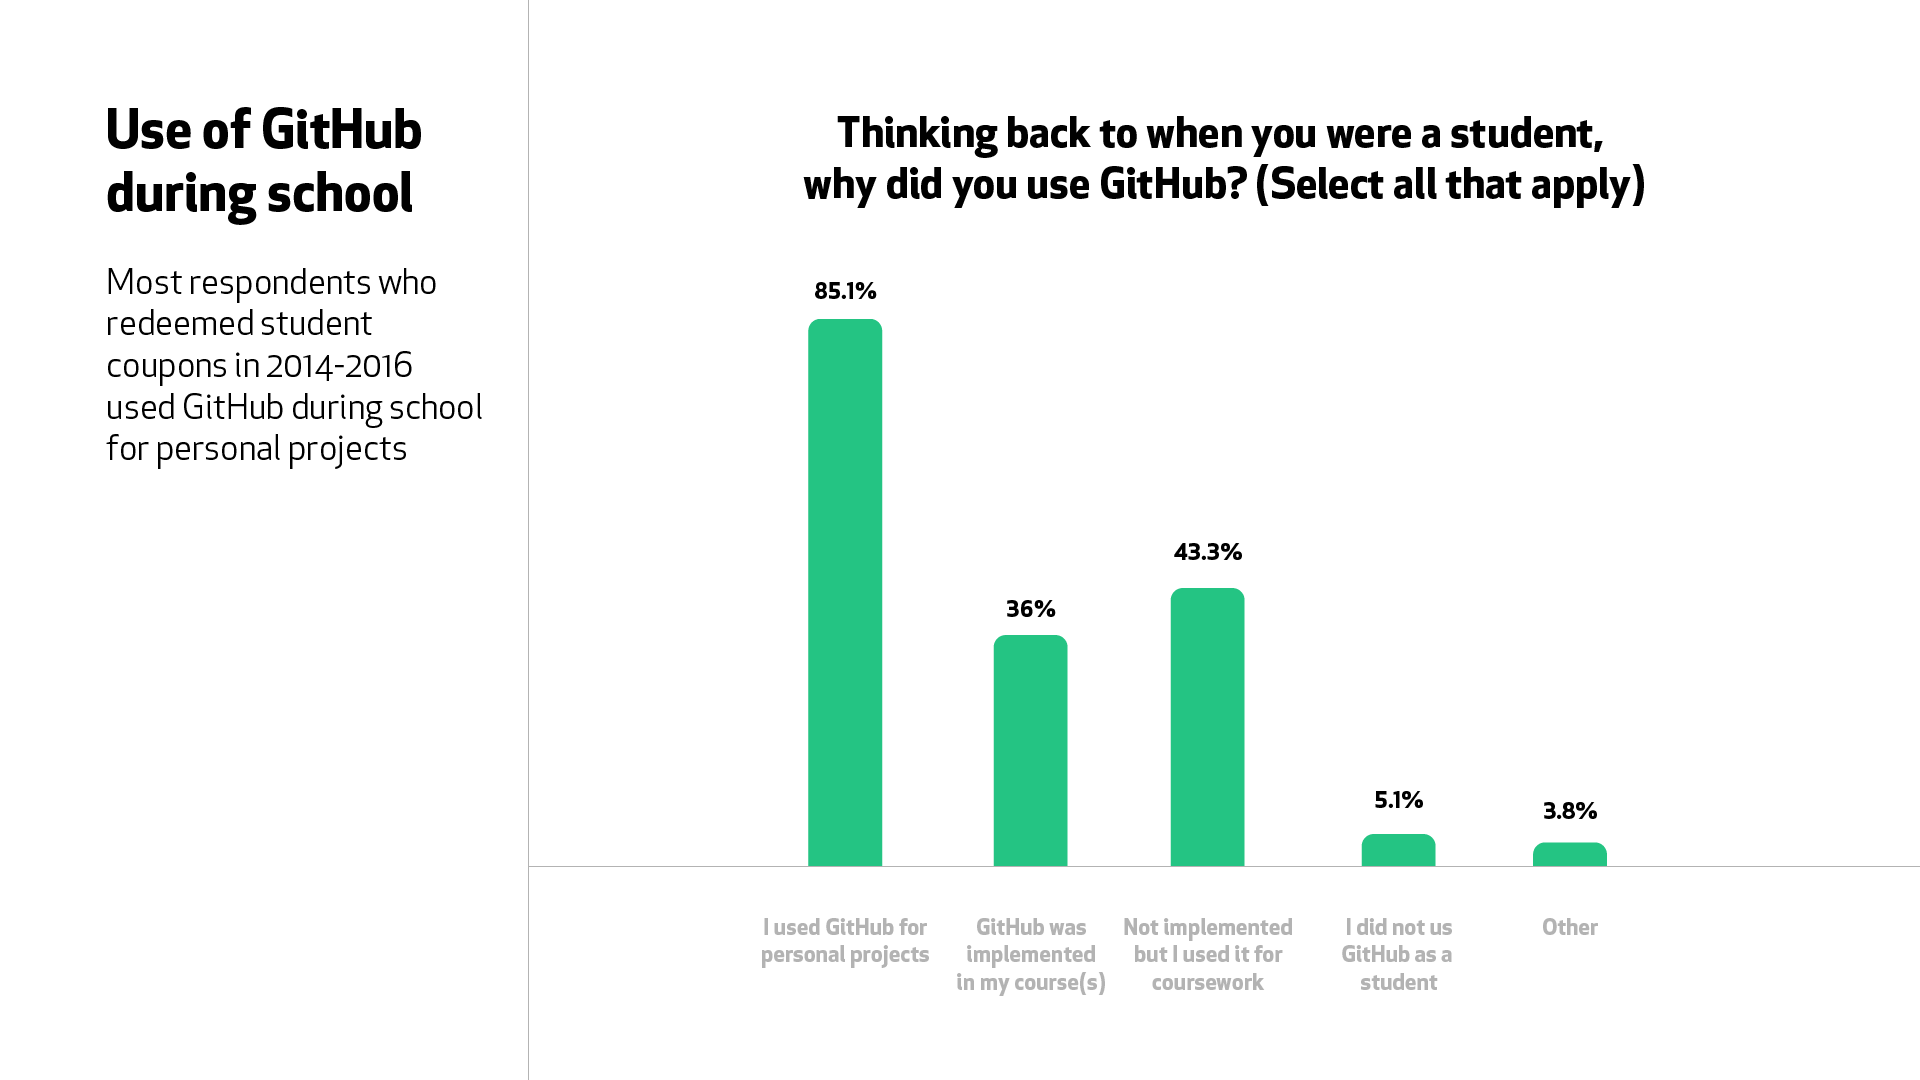 A graph for the question, “Thinking back to when you were a student, why did you use GitHub?” 85.1% used it for personal projects and 36% said it was implemented in a course.